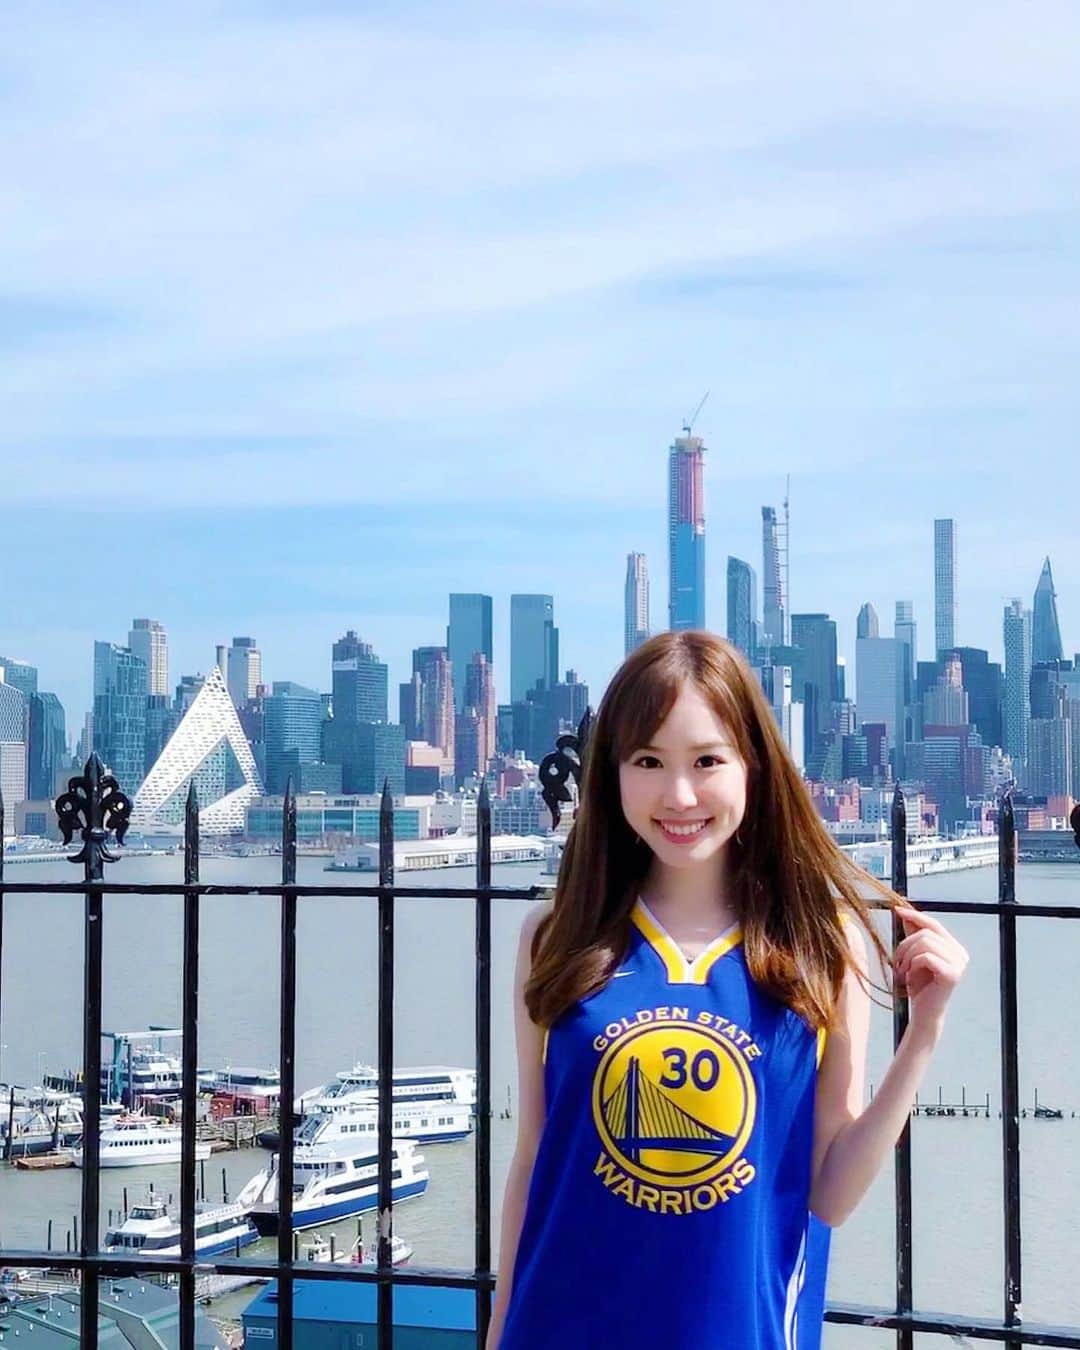 メロディー・モリタさんのインスタグラム写真 - (メロディー・モリタInstagram)「Honored to be informed that I was the top influencer for NBA @warriors content in May!✨ I captured moments at the games + did a shoot in collab with ballet this time.💙 I'm glad that I was able to help even a little bit by sharing and spreading how incredible this league is.😊 The NBA Finals is tied 1-1 between the Raptors and Warriors. With several players yet to return and/or injured, it's truly a matchup that's difficult to make predictions. I absolutely love this time of the year where fans from all around the globe come together to watch the most intense and high level game from both teams. Wishing all the best for both sides!!🙌🏀🔥 (The jersey I’m wearing is @stephencurry30, gifted by @nba. Thank you!) * インスタで『NBA #Warriors』 に関連するコンテンツで、5月の最も影響力のあったインフルエンサーとしての賞を頂きました！✨ * 大変光栄なことに1位に選んで頂き、幼いころからLAで多くのレイカーズファンの中で育ち、とても馴染みあるNBA関連での受賞は本当に嬉しいです。 * 現地取材に加え、今回は、私の得意分野のバレエとNBAを組み合わせた作品に仕上げましたので、微力ですが少しでもNBAの素晴らしさを広めるお手伝いが出来ていましたら幸いです🙏 * NBAファイナルは、1-1となったラプターズVSウォリアーズ。主力選手の欠場や怪我などで先が予想できない展開もありそうですが... 両チーム、非常にハイレベルな熱い戦いをみせてくれることを世界中が期待して応援しています‼️ (着用しているジャージーは、NBAから頂いたものです✨) #NBA #NBAFinals #StephCurry #StephenCurry #Rakuten #Raptors #ウォリアーズ #ラプターズ」6月4日 10時26分 - melodeemorita